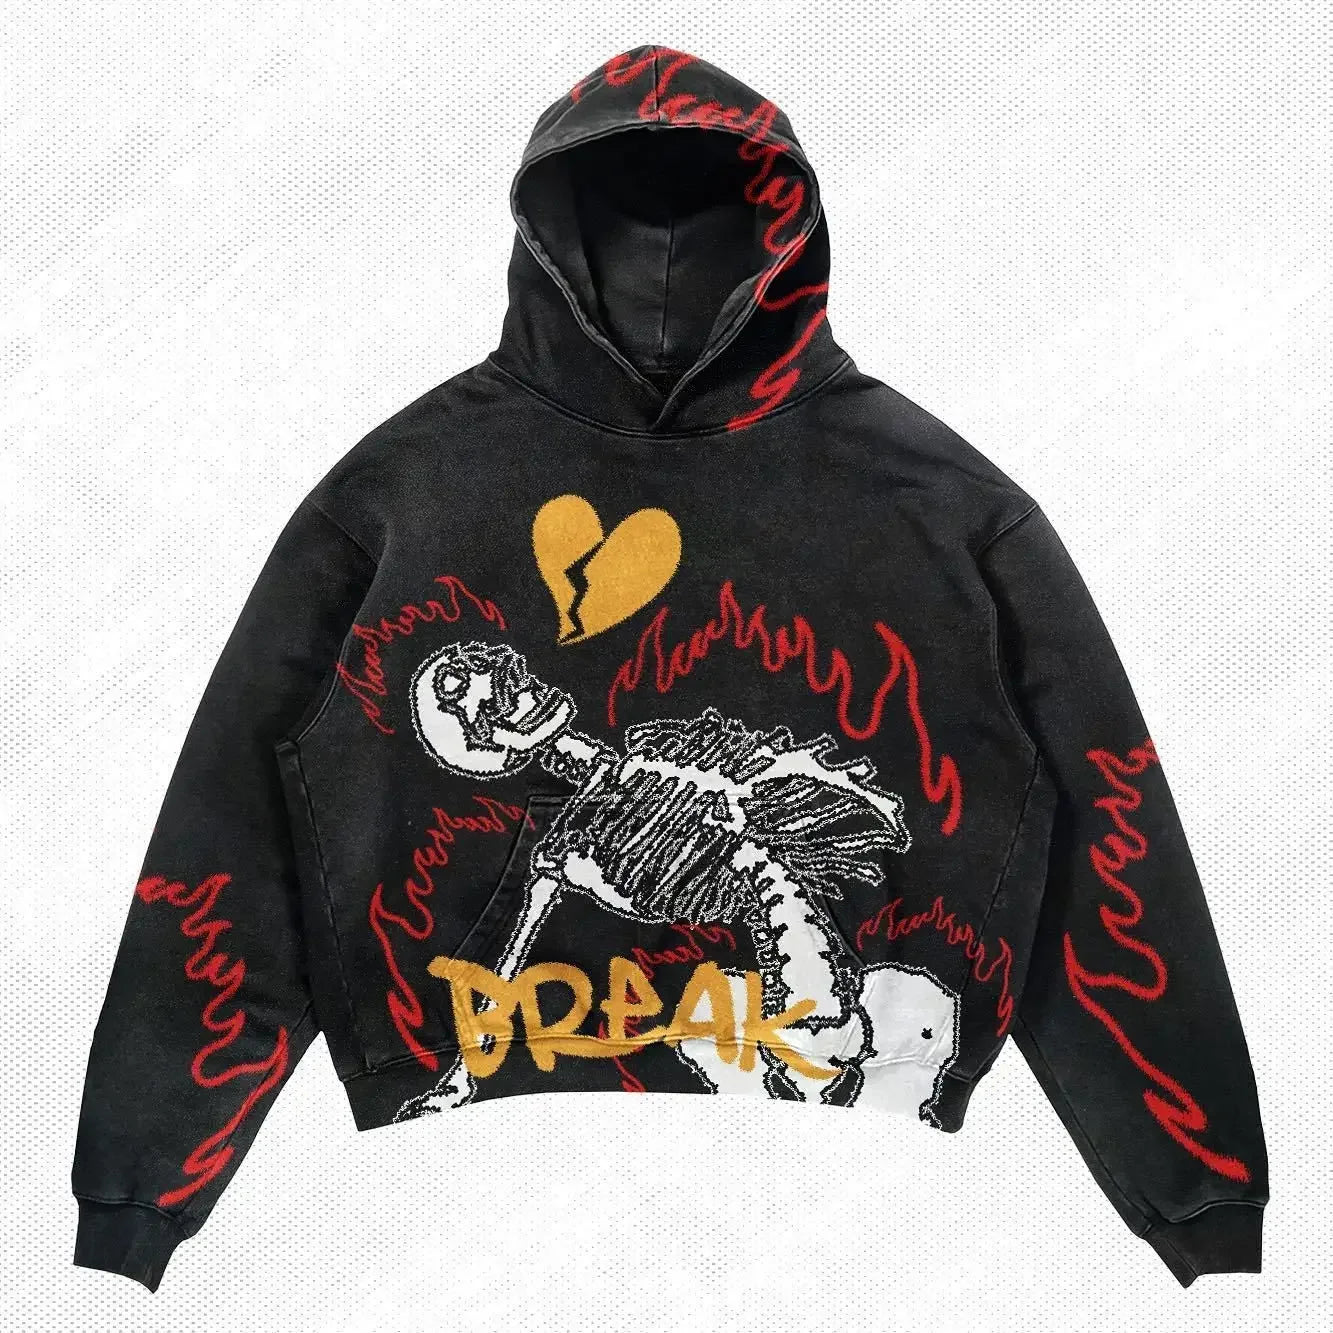 A black hooded sweatshirt with red flame designs, a skeleton graphic, a broken heart image, and the word "BREAK" in yellow text. Perfect for Men's Fashion and Punk Style Hoodies aficionados who want versatile Four Seasons Clothing. Introducing the Explosions Printed Skull Y2K Retro Hooded Sweater Coat Street Style Gothic Casual Fashion Hooded Sweater Men's Female by Maramalive™.